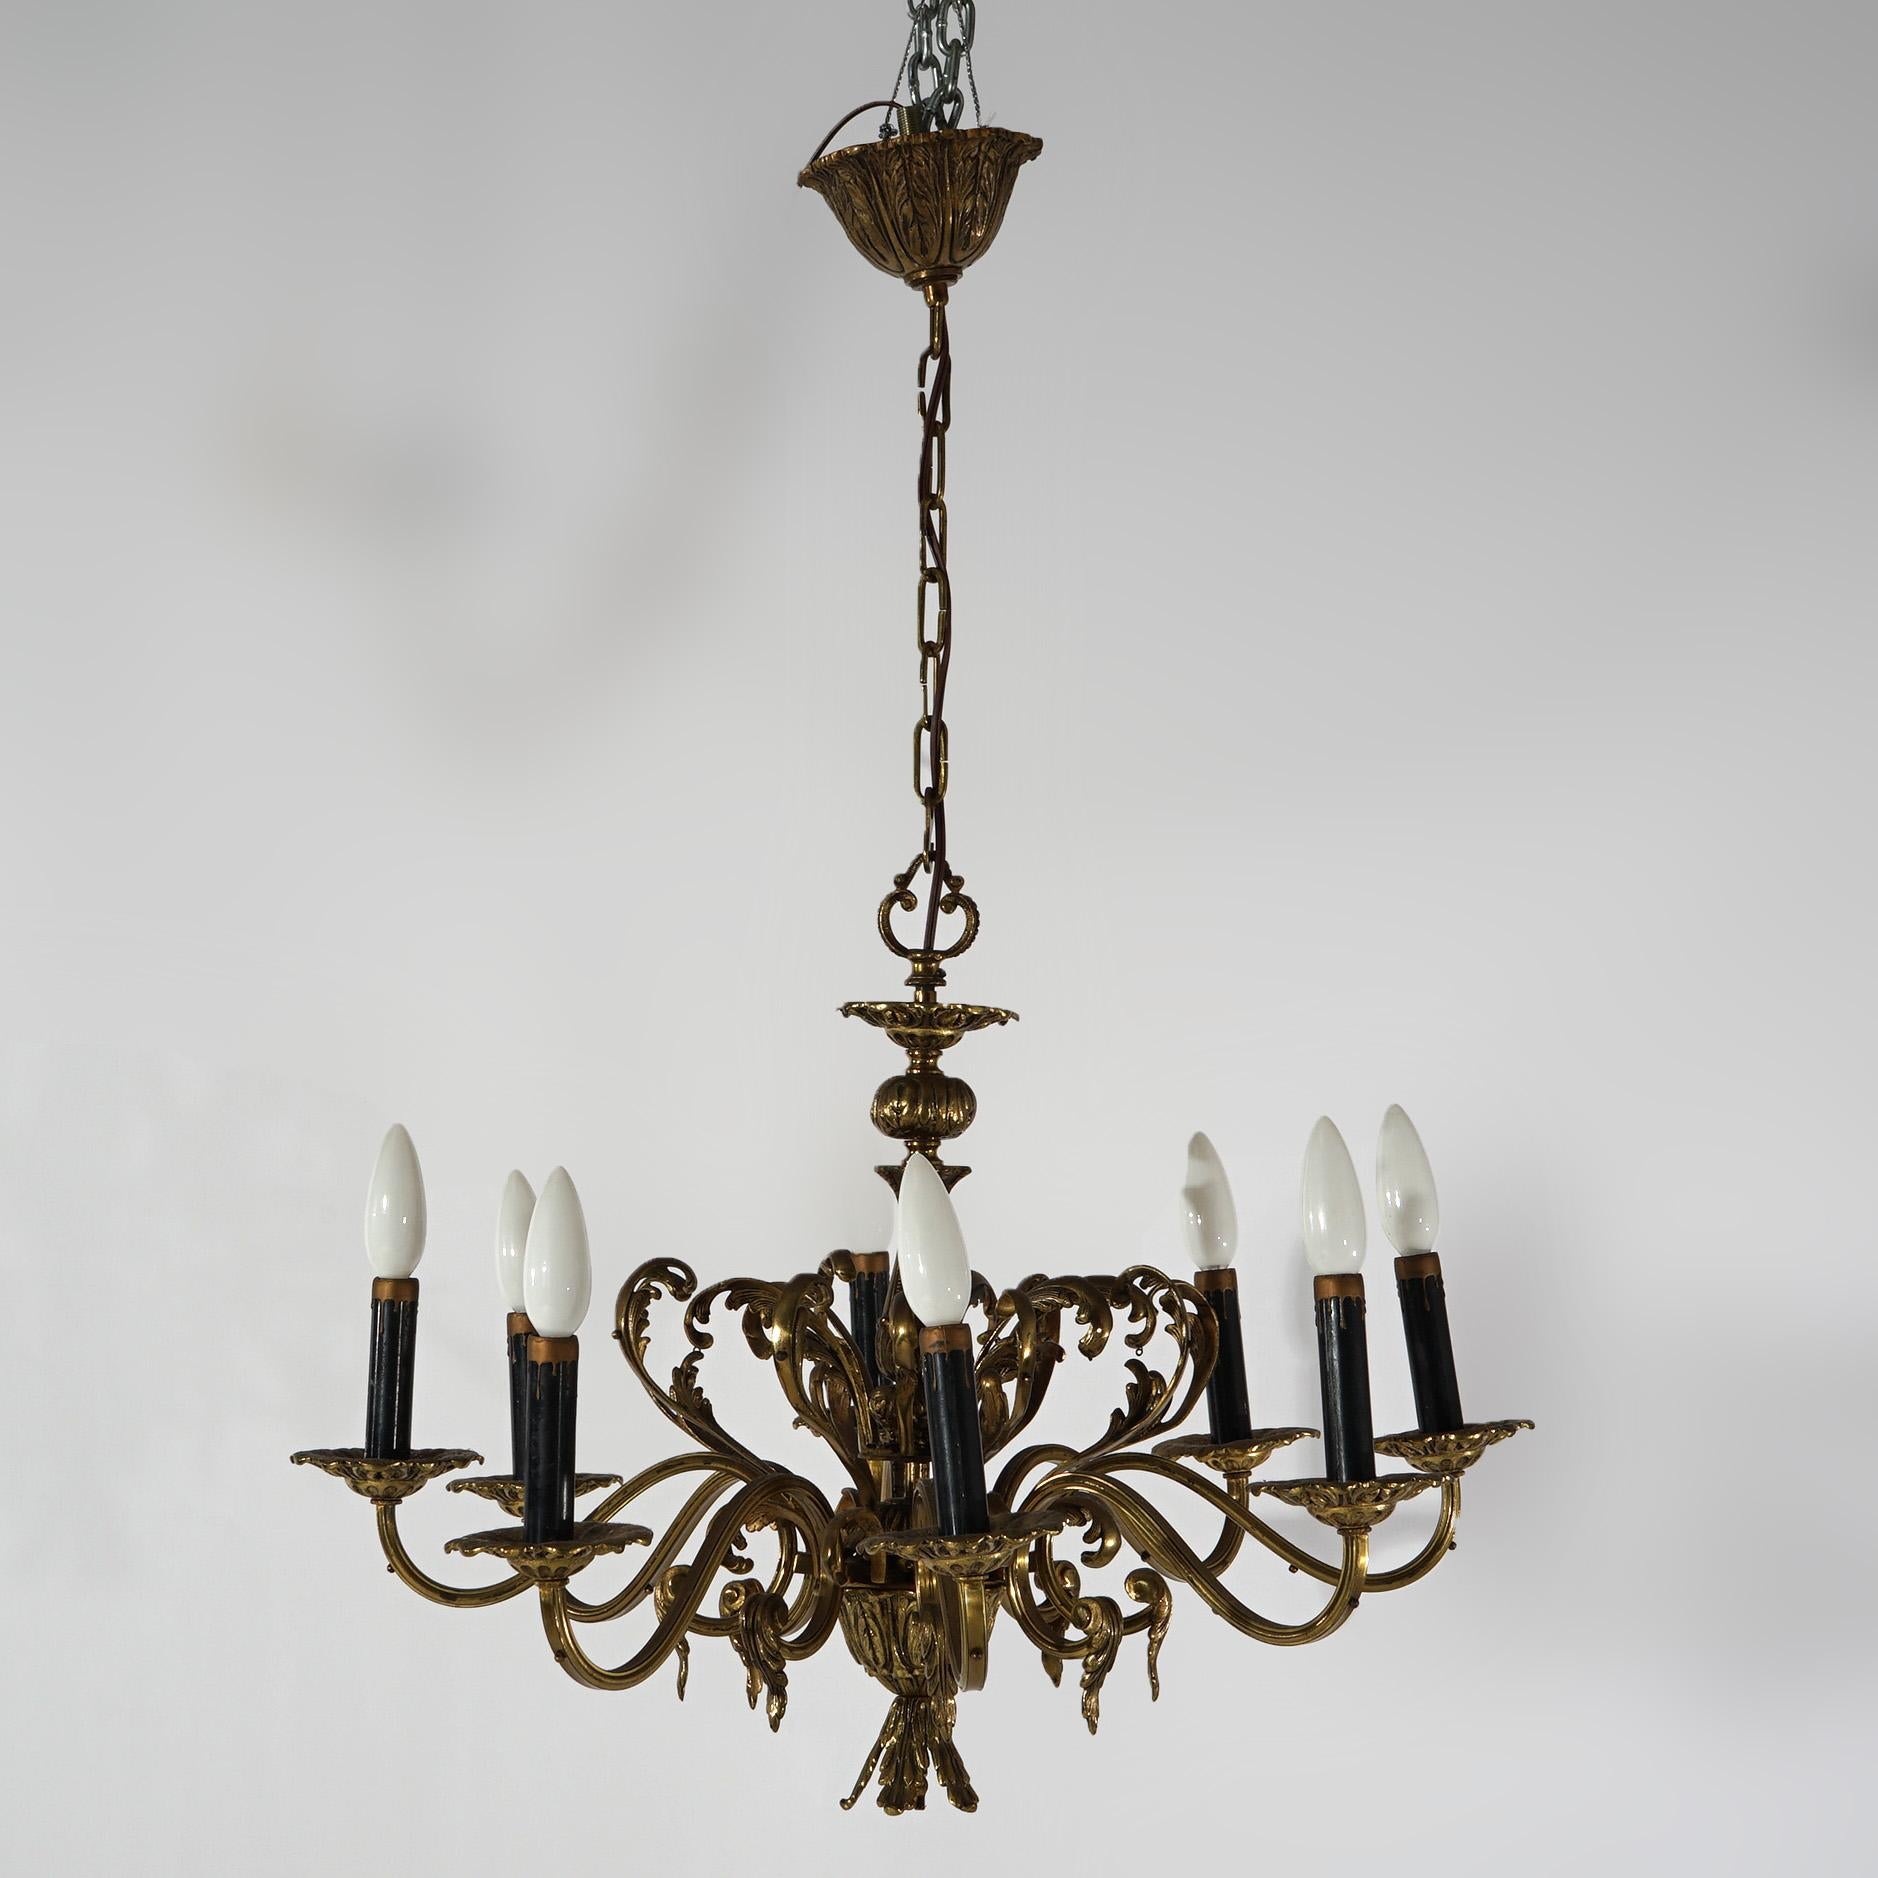 An antique French Empire chandelier offers bronzed metal frame with eight scroll form arms terminating in candle lights, foliate elements throughout, c1940

Measures - 33